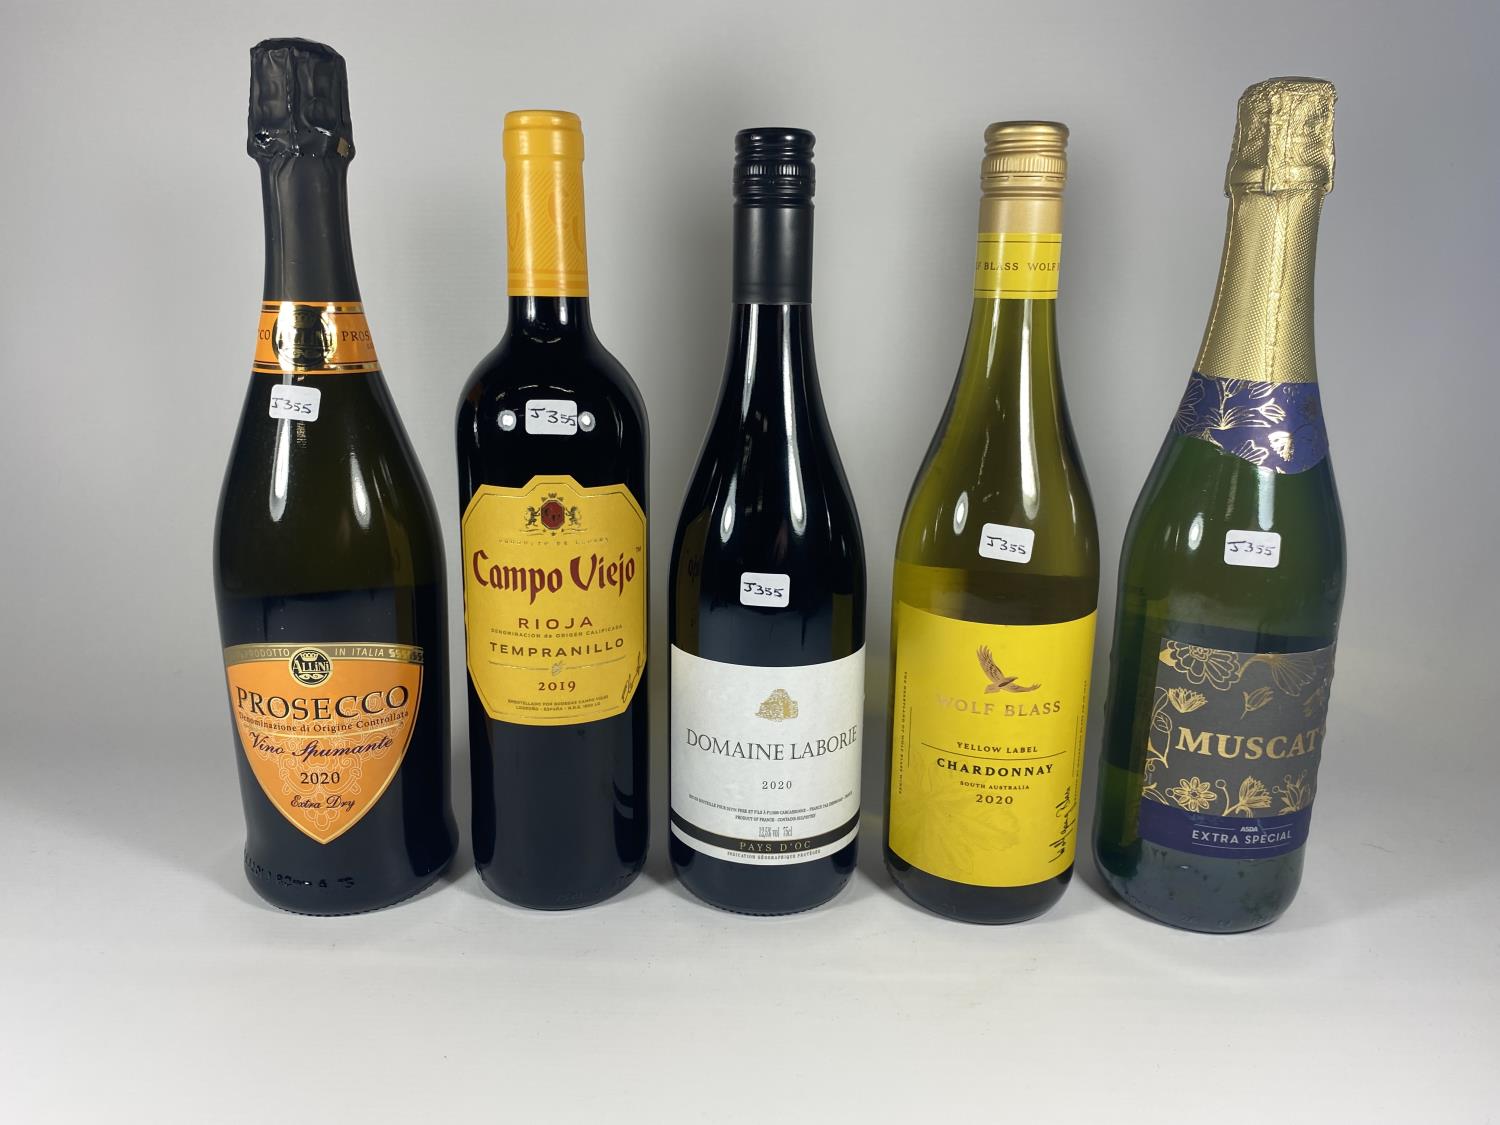 5 X MIXED 75CL BOTTLES - PROSECCO, SAMPO VIEJO, DOMAINE LABORIE, WOLF BLASS CHARDONNAY & MUSCAT